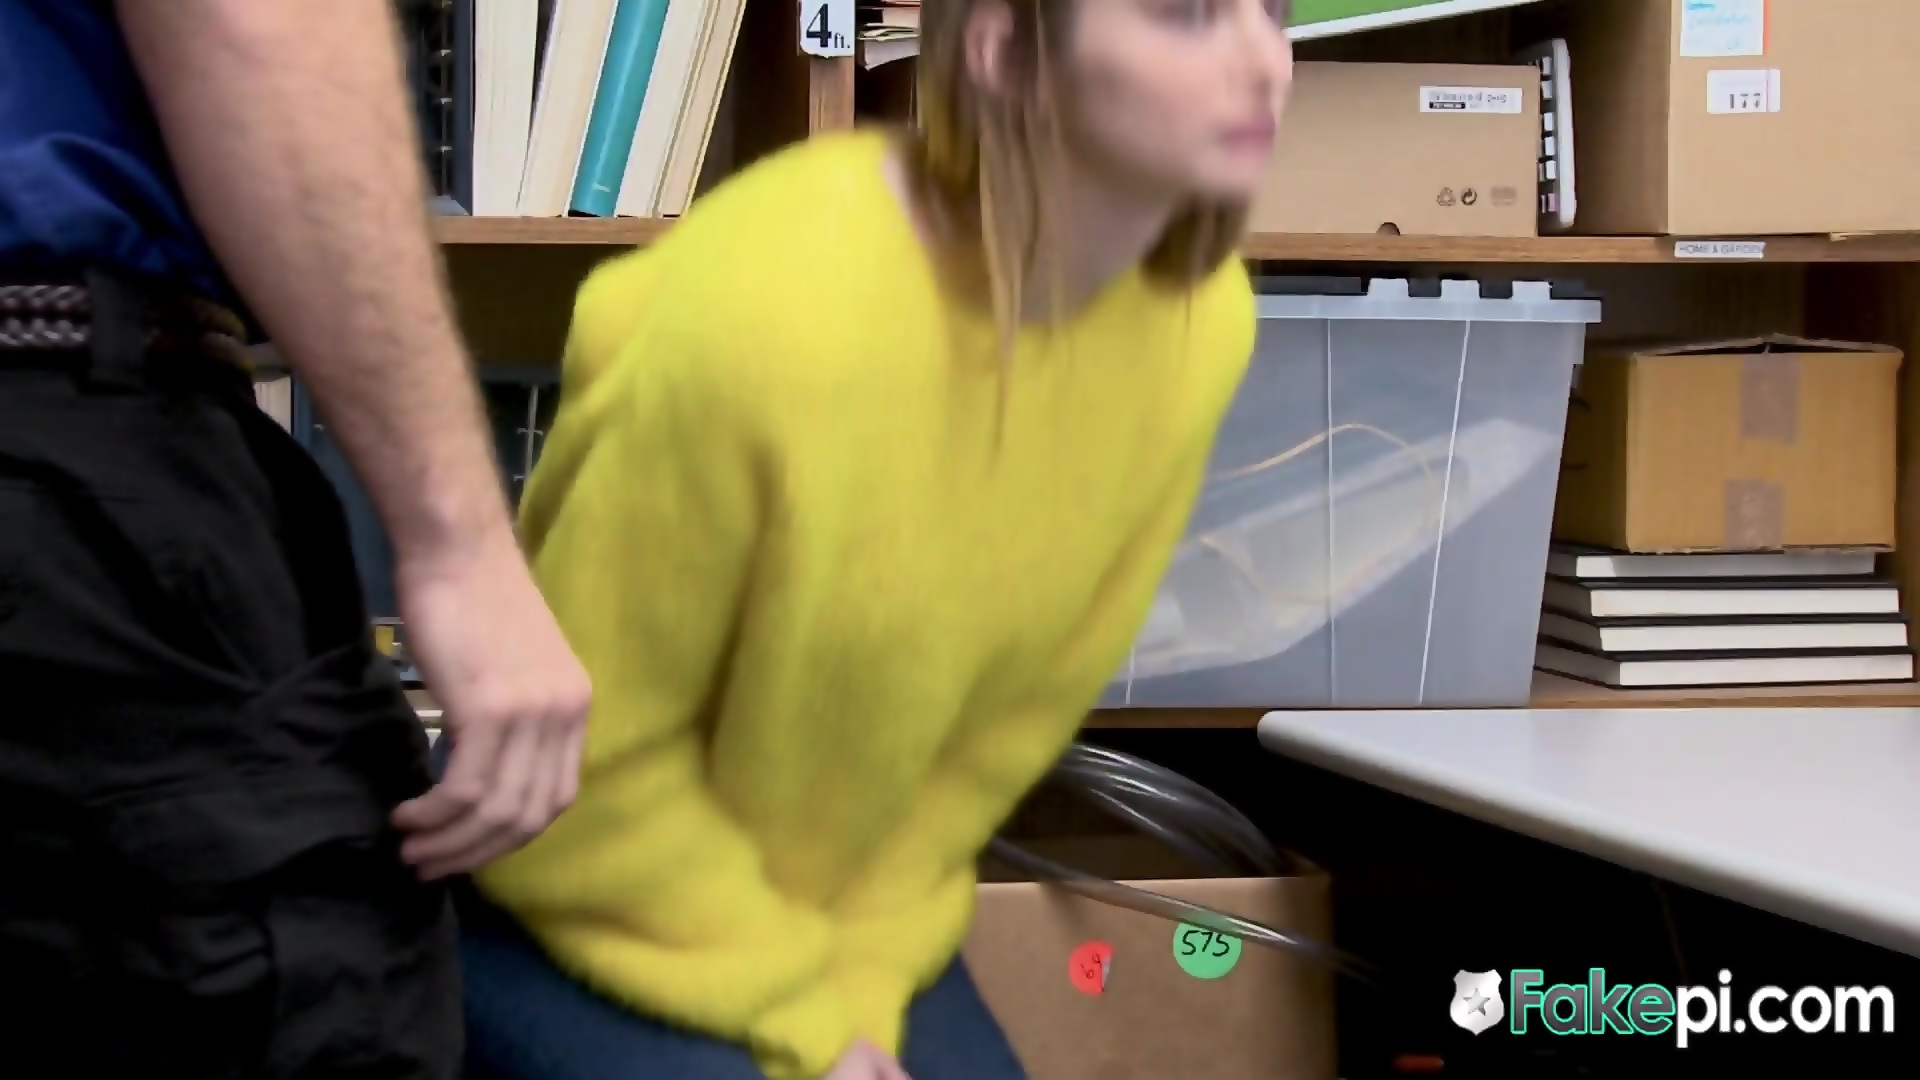 Nadya Is Caught When She Hides Stolen Items Under Her Yellow Sweater